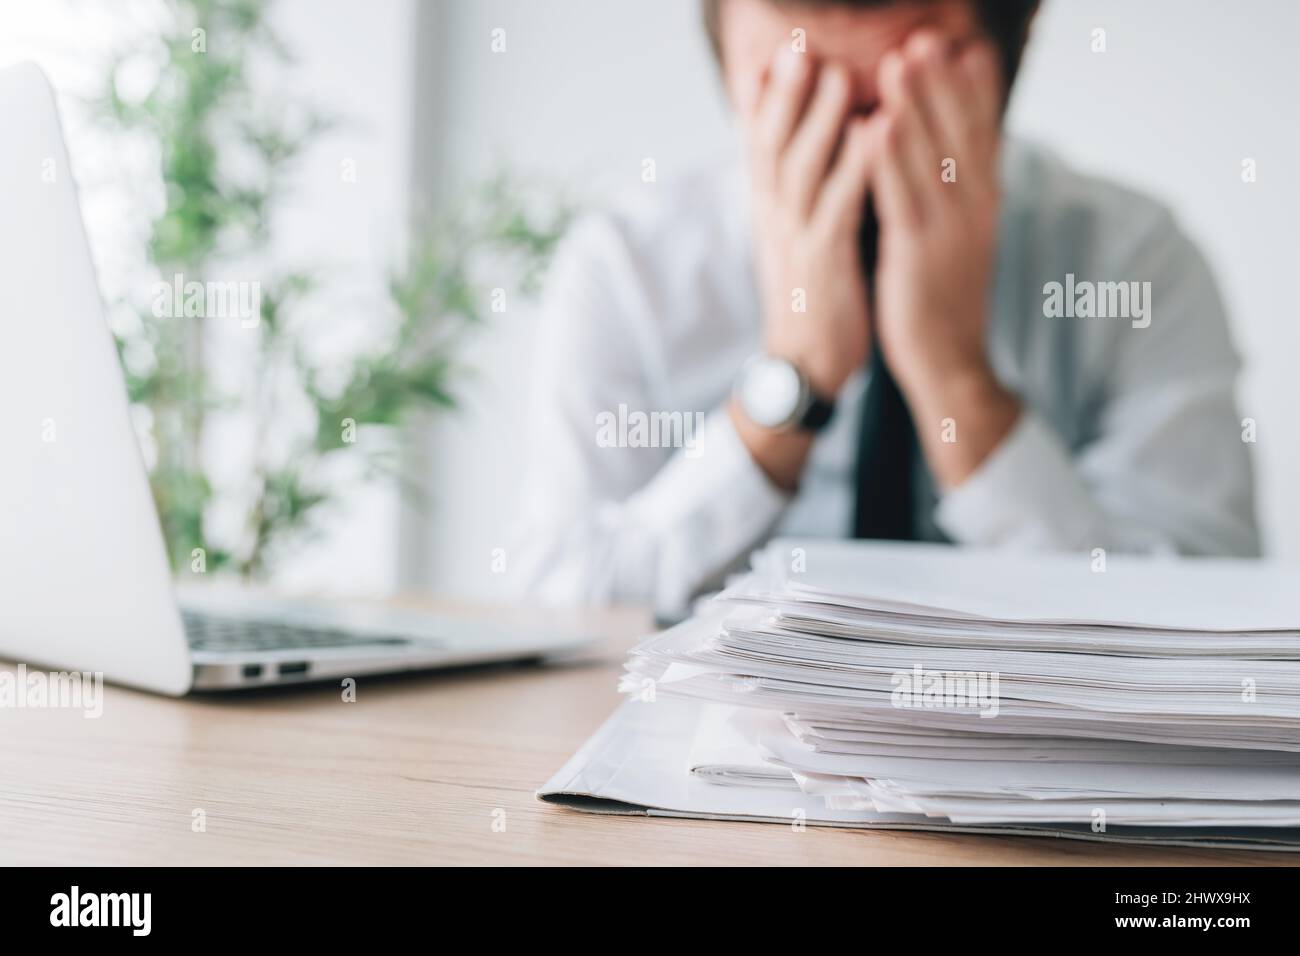 Exhausted businessman overloaded with work in office, selective focus Stock Photo